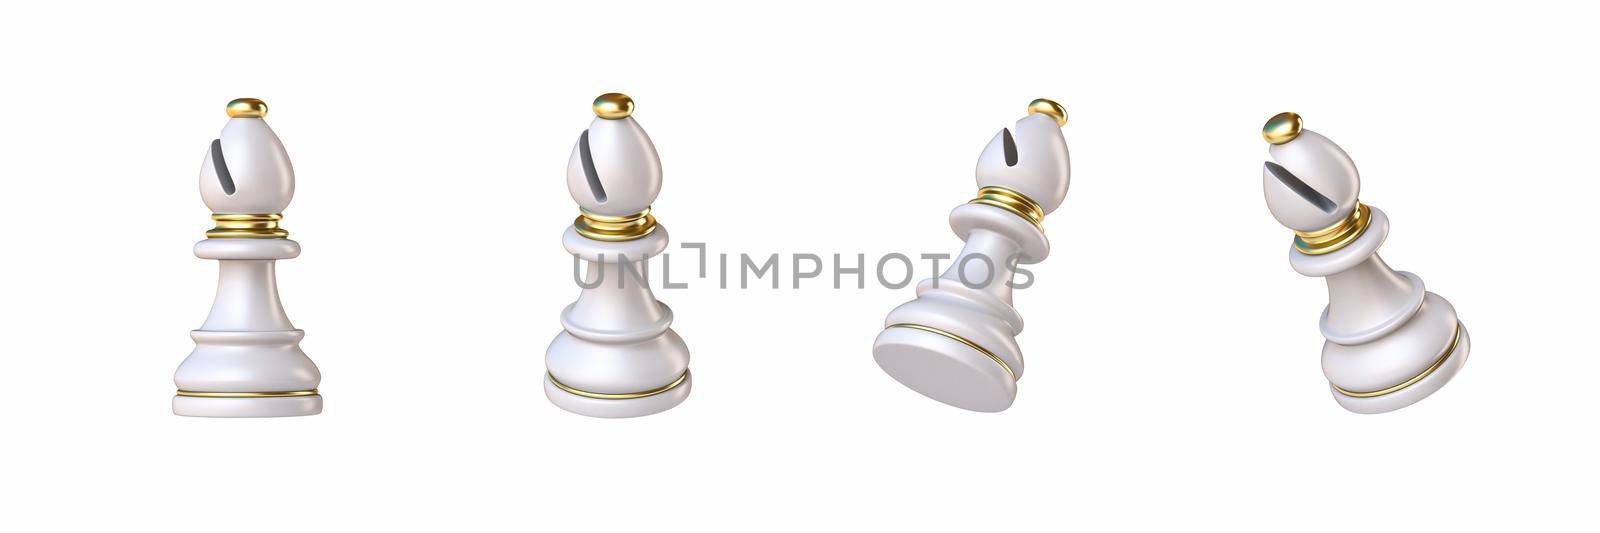 White chess Bishop in four different angled views 3D rendering illustration isolated on white background